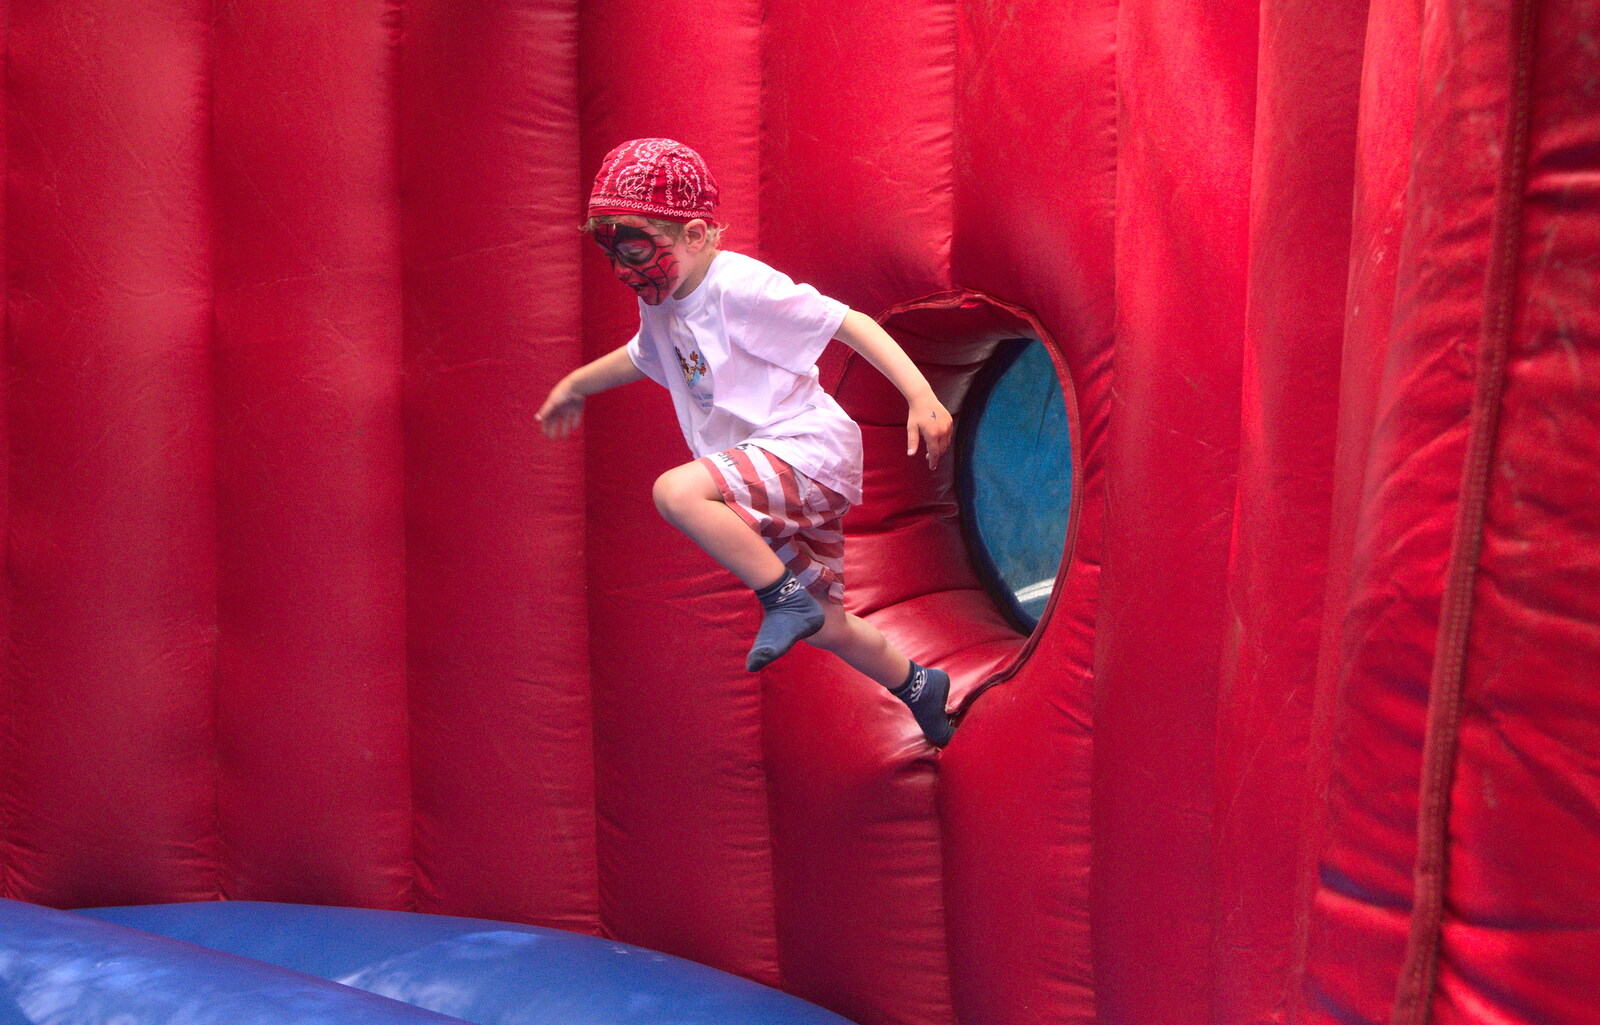 Fred leaps around on a bouncy castle from Marconi's Demolition and Brome Village Fete, Chelmsford and Brome, Suffolk - 6th July 2013